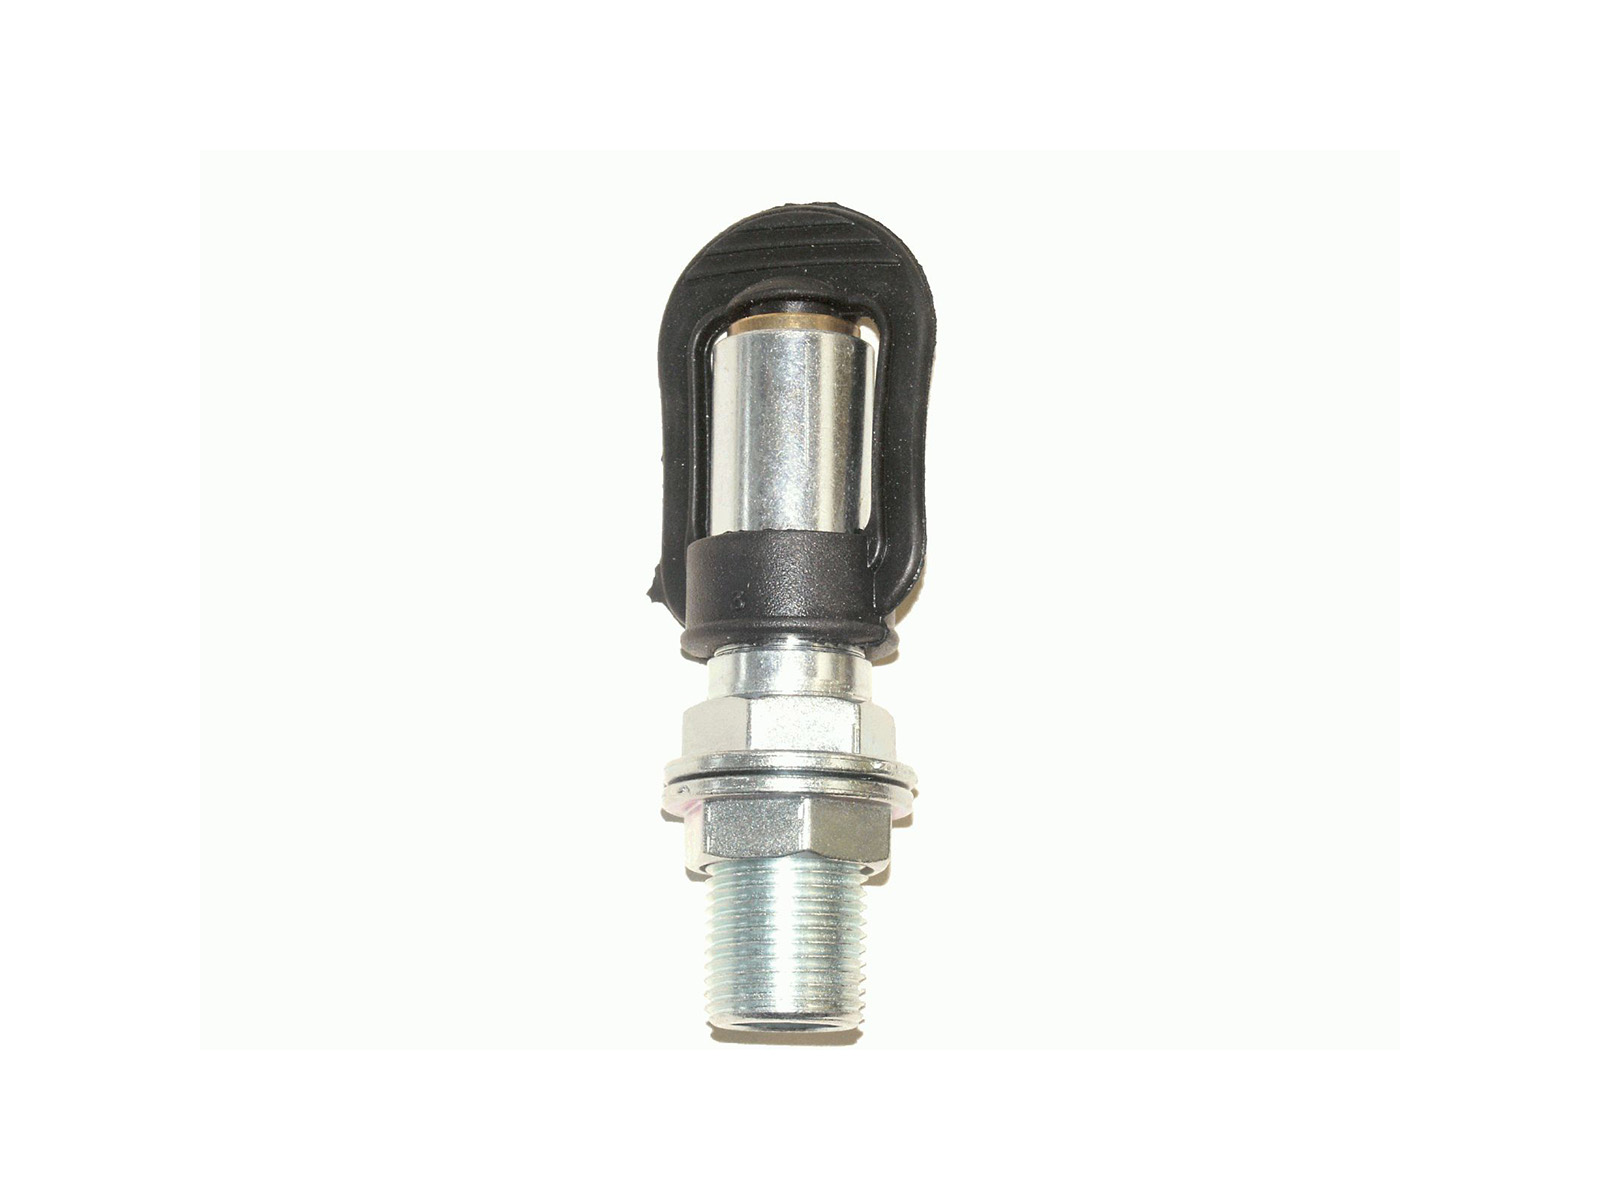 Socket Pole with Threaded Tube and Nut